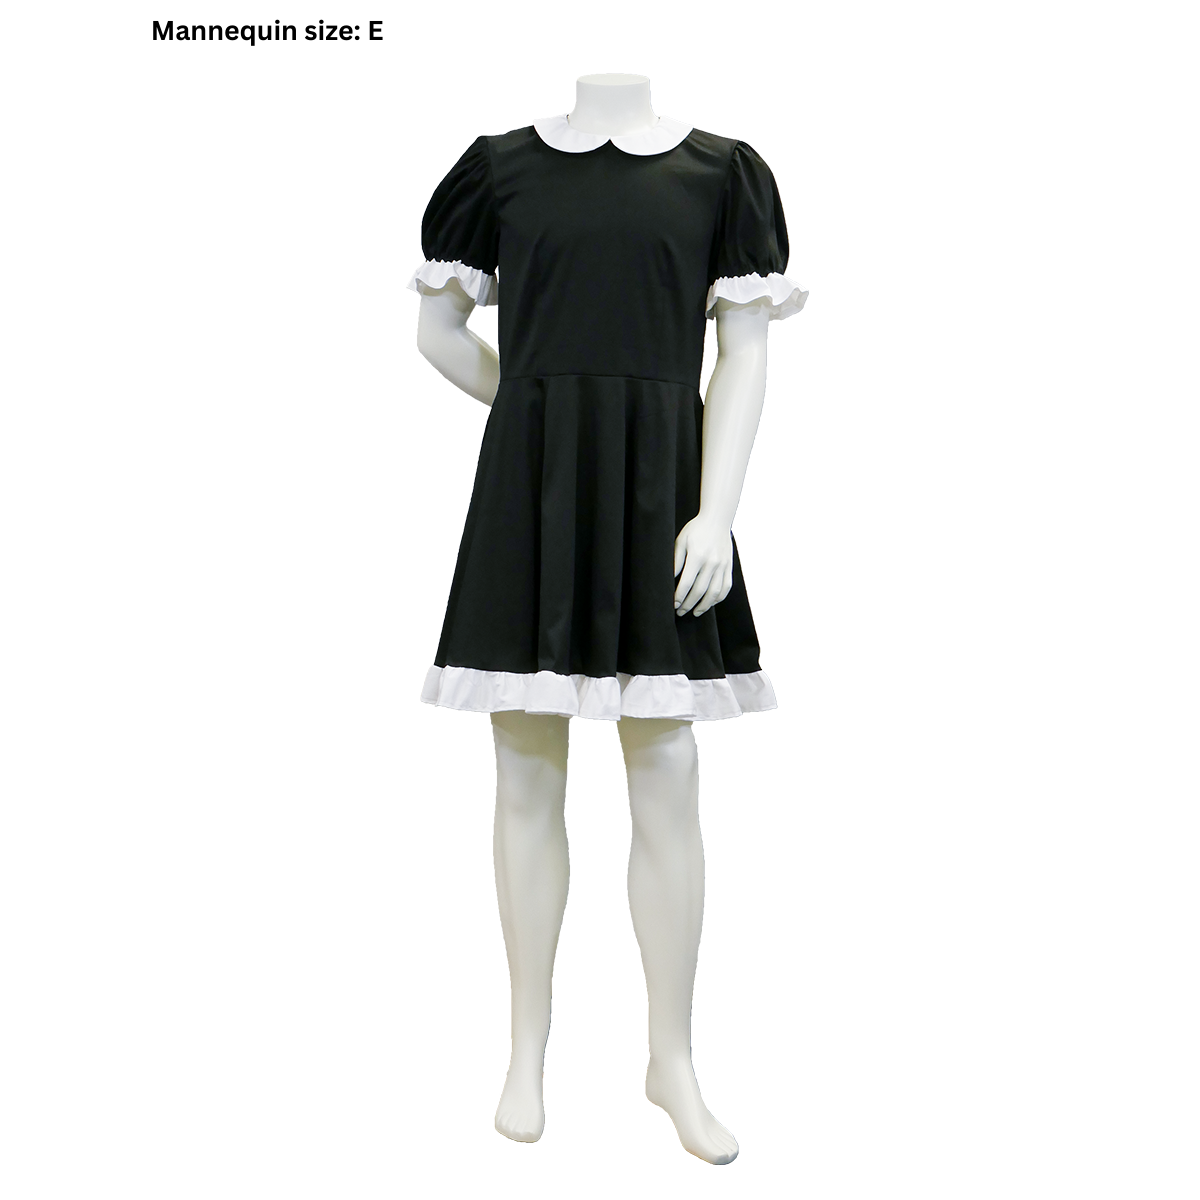 The front view of the dress portion of the completed FSCO Maid Outfit (m) without the apron. Fit of the skirt is more visible as well as the white ruffles at the ends of the sleeve and skirt hem as well as white Peter Pan collar.